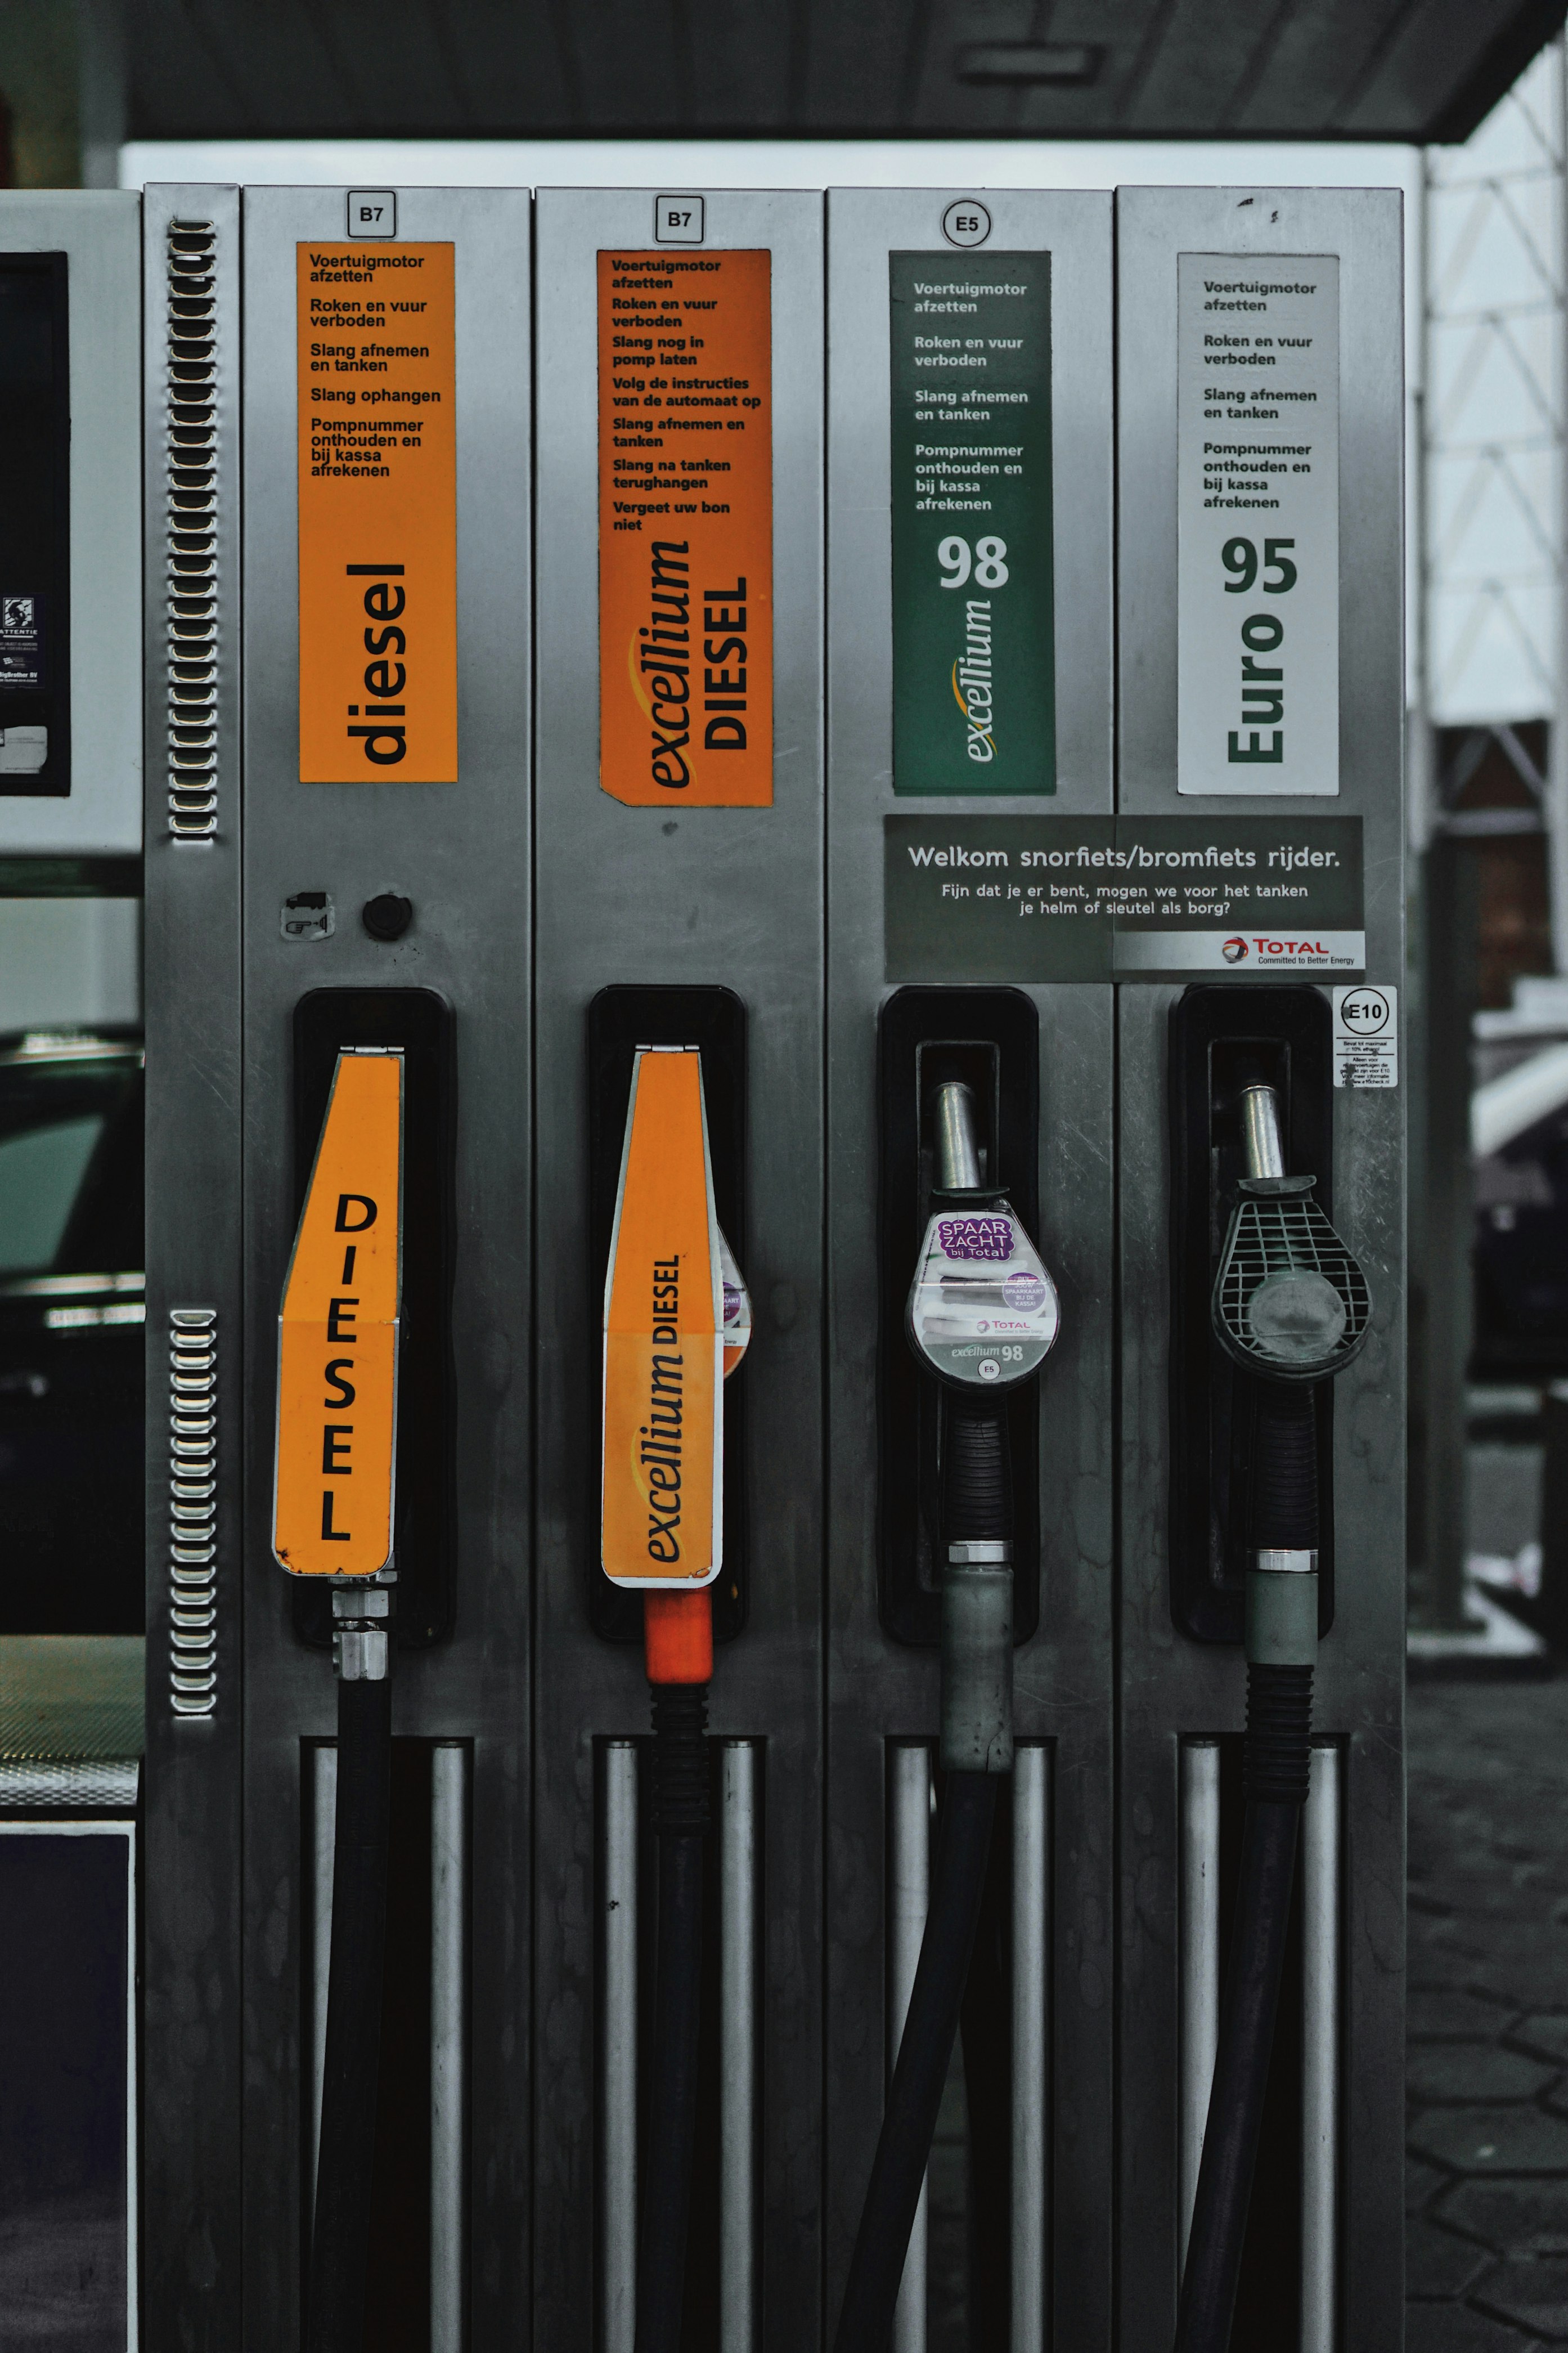 A row of gas pumps sitting next to each other.